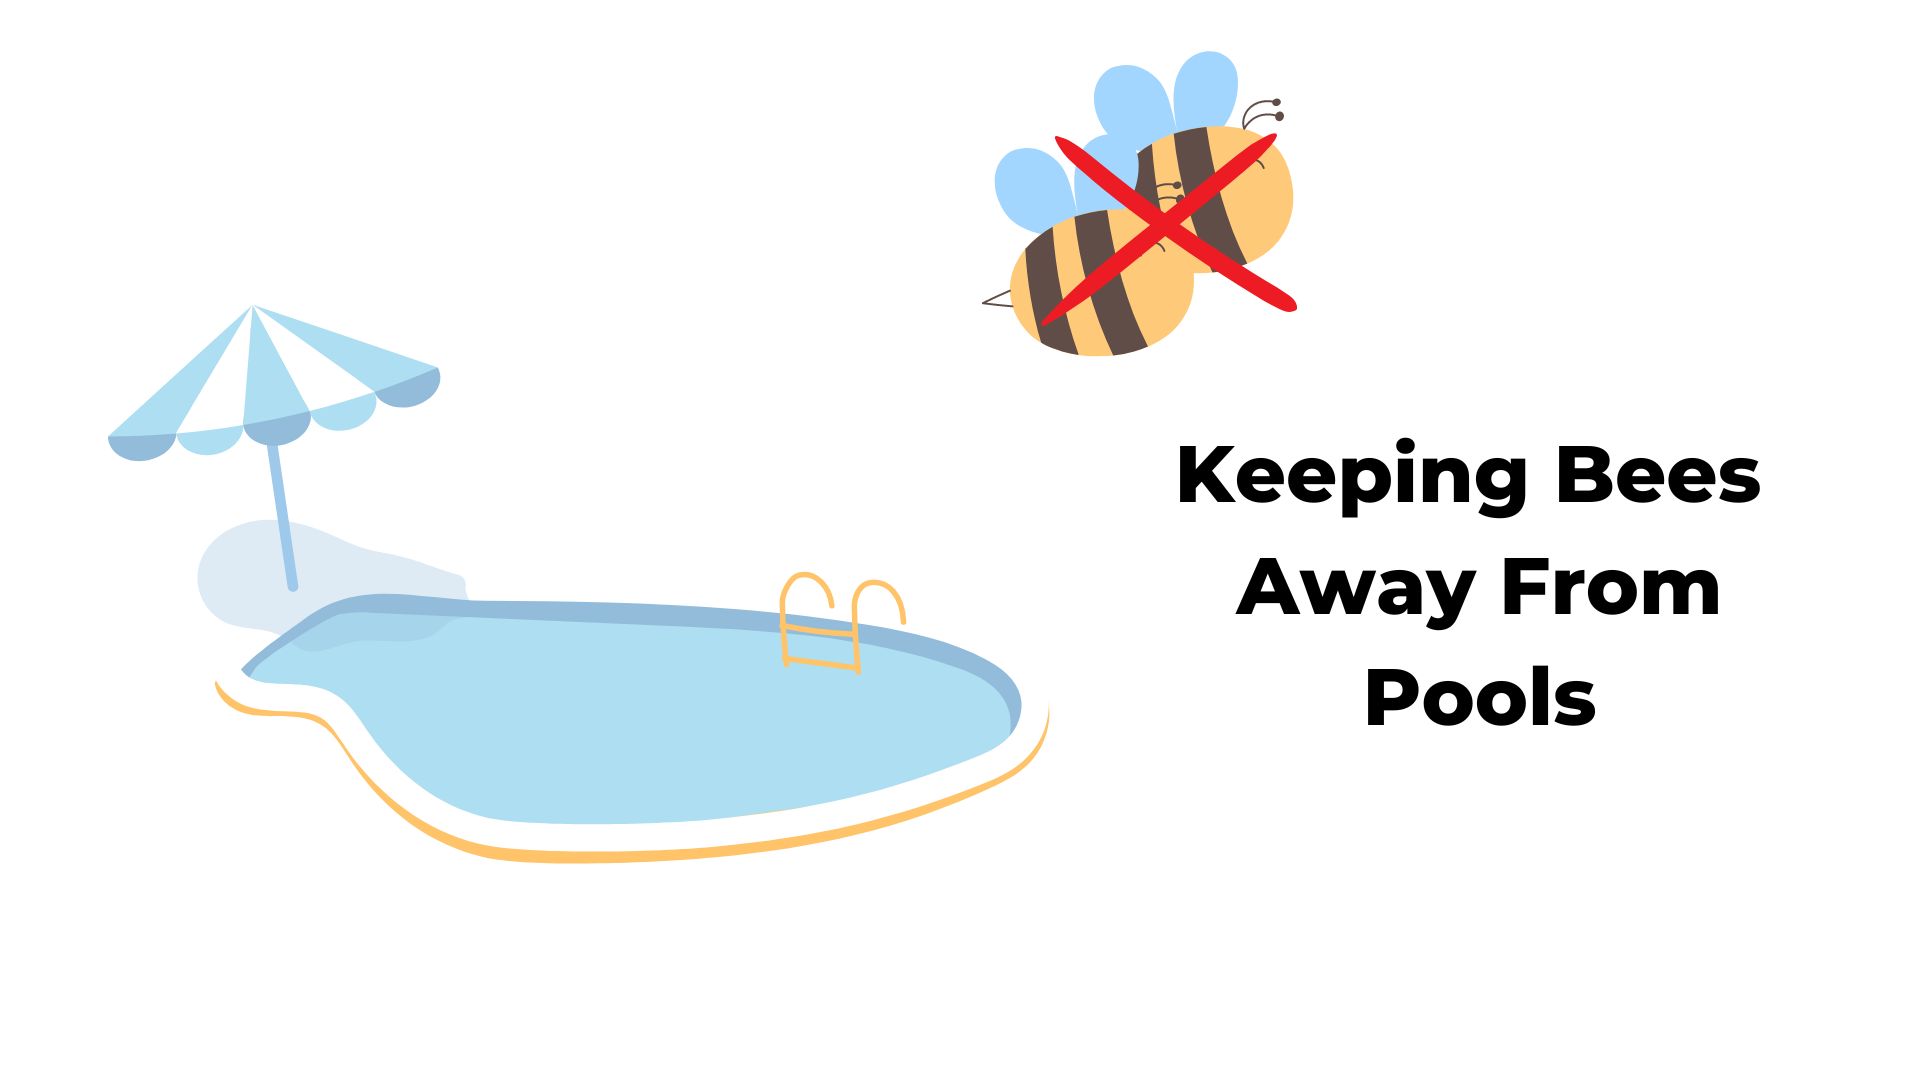 How to Keep Bees Away From the Pool